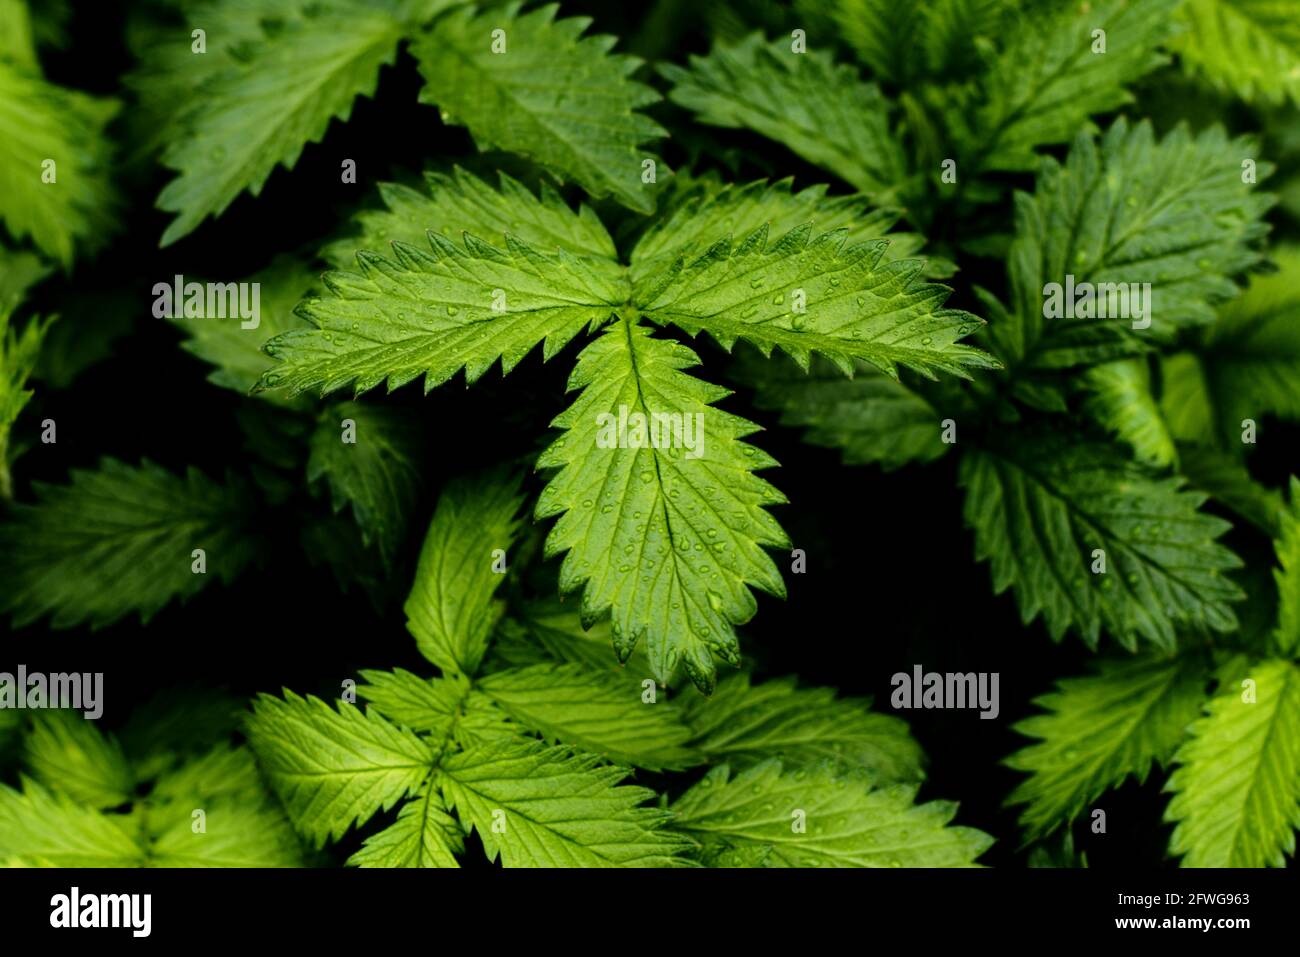 Green leaves of Agrimonia procera herb Stock Photo